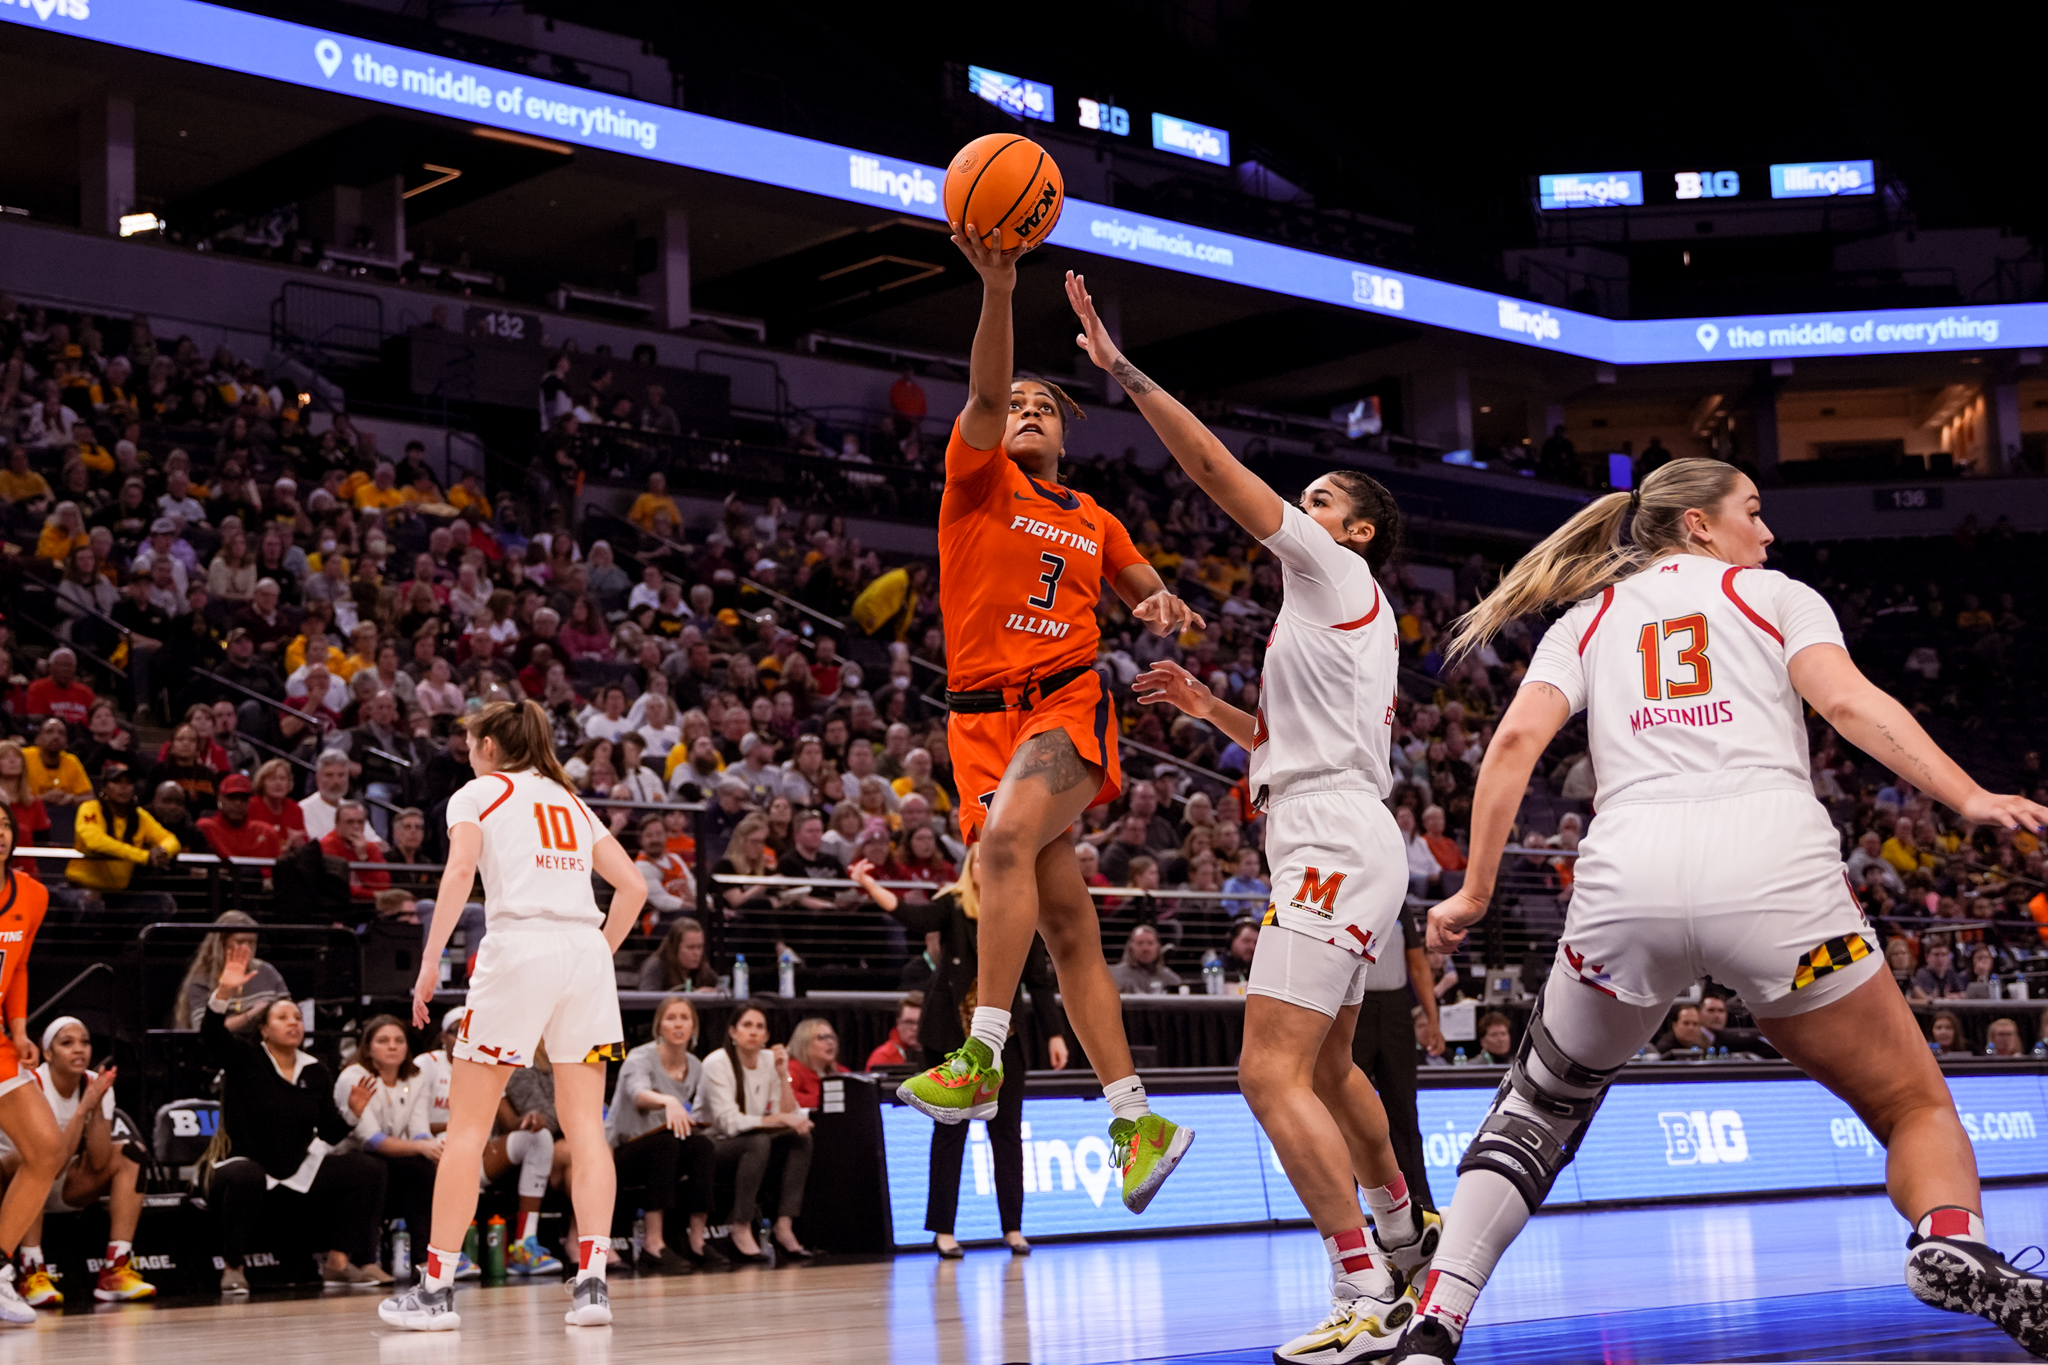 Illini's Big Ten Tournament Run Ends With Loss To Terps